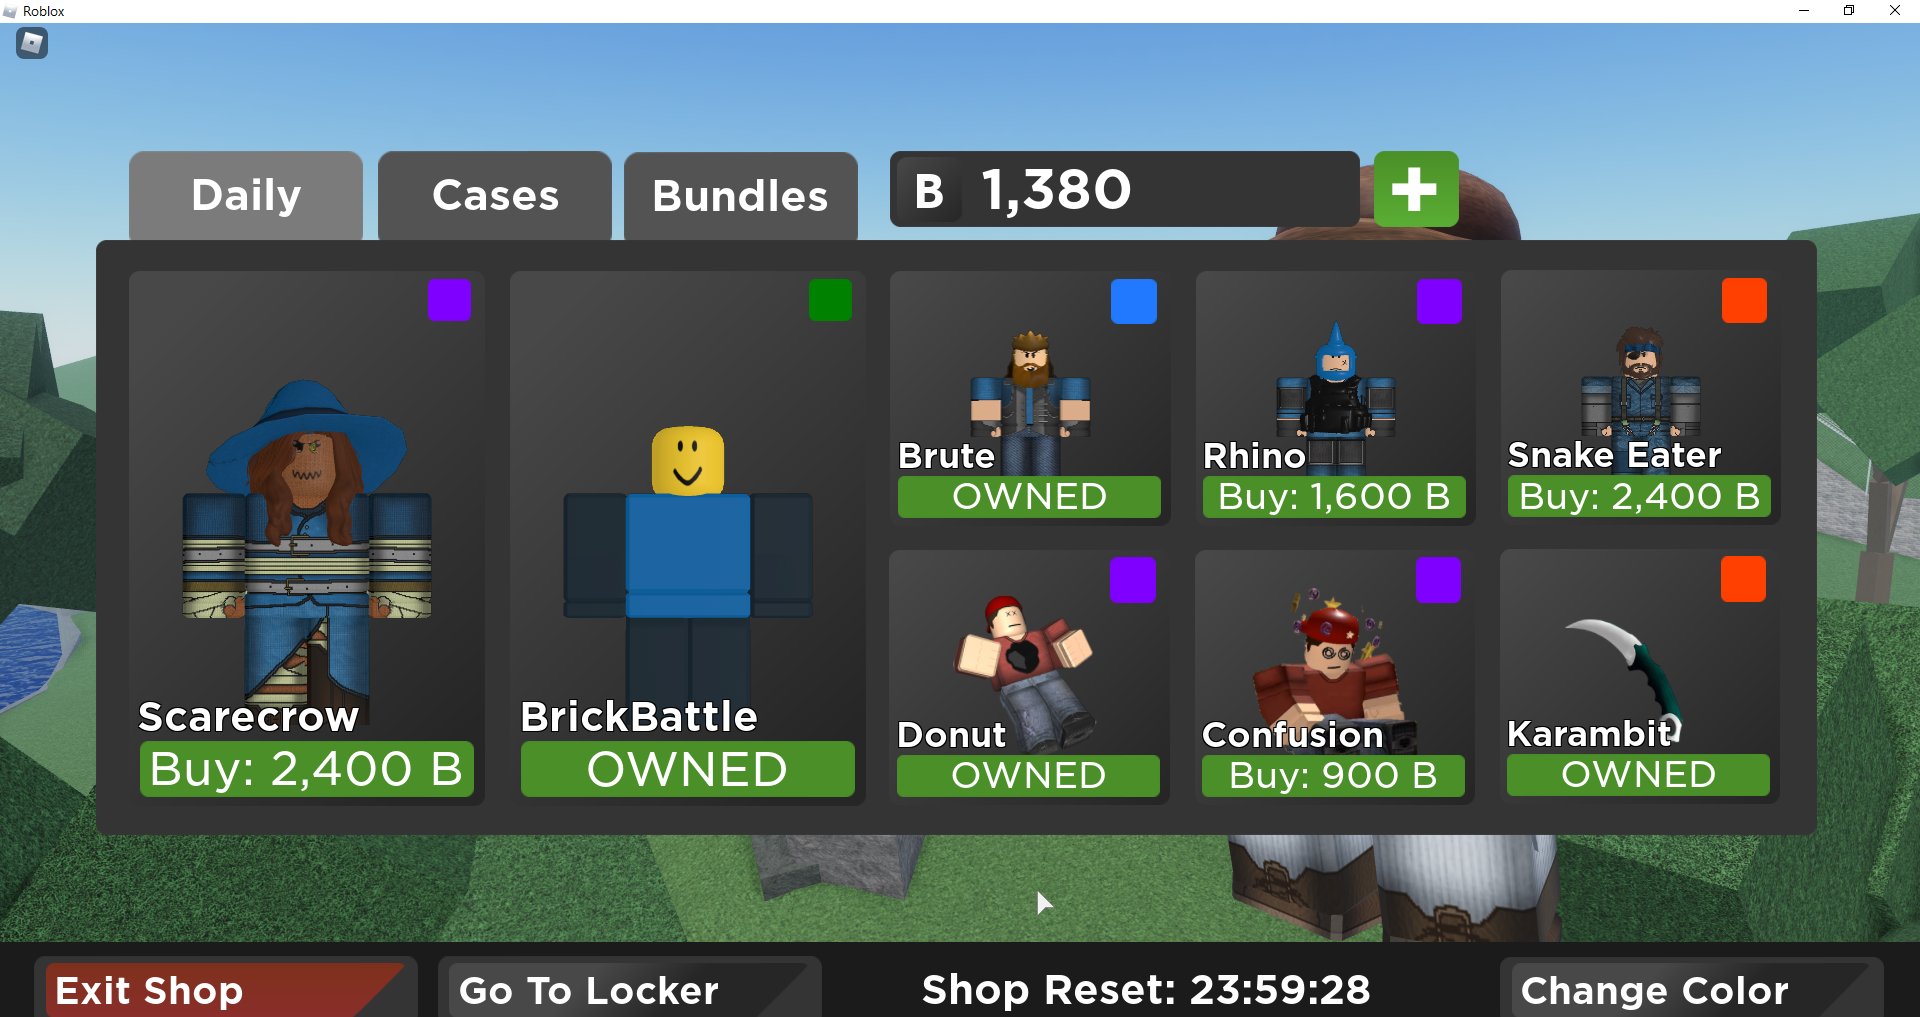 Arsenal Daily Shop On Twitter Roblox Robloxarsenal Arsenaldailyshop 06 29 2020 - roblox arsenal brickbattle